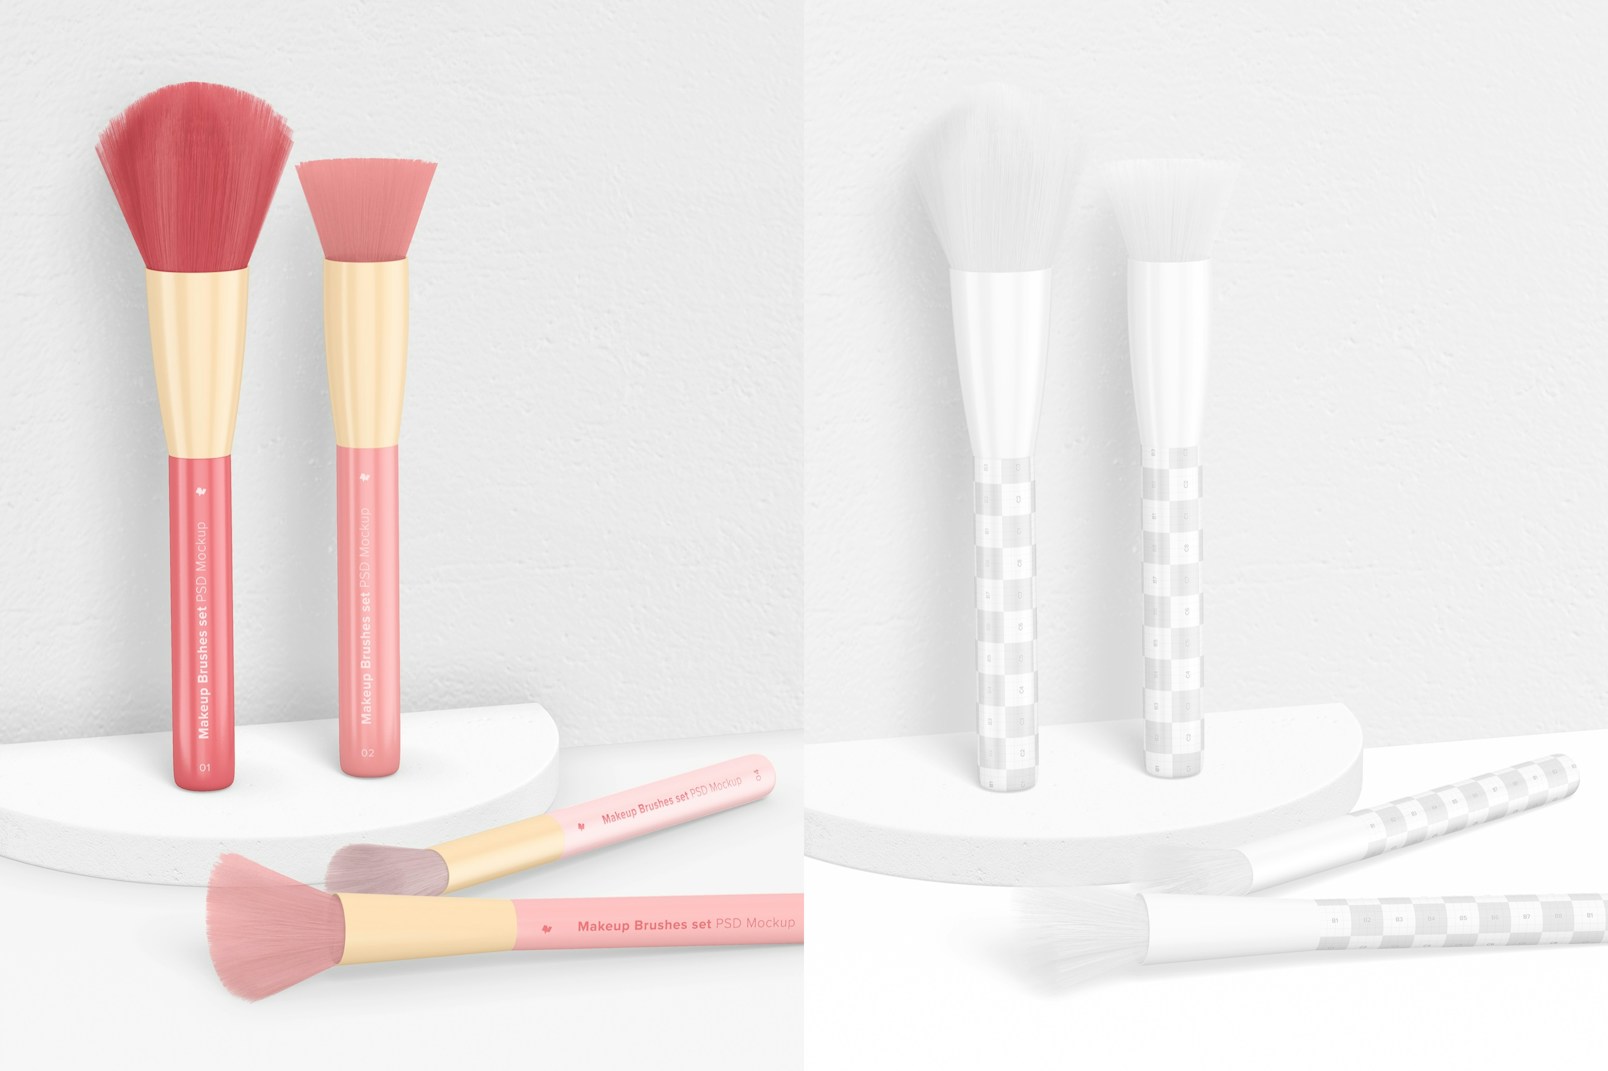 Makeup Brushes Set Mockup, Standing and Dropped